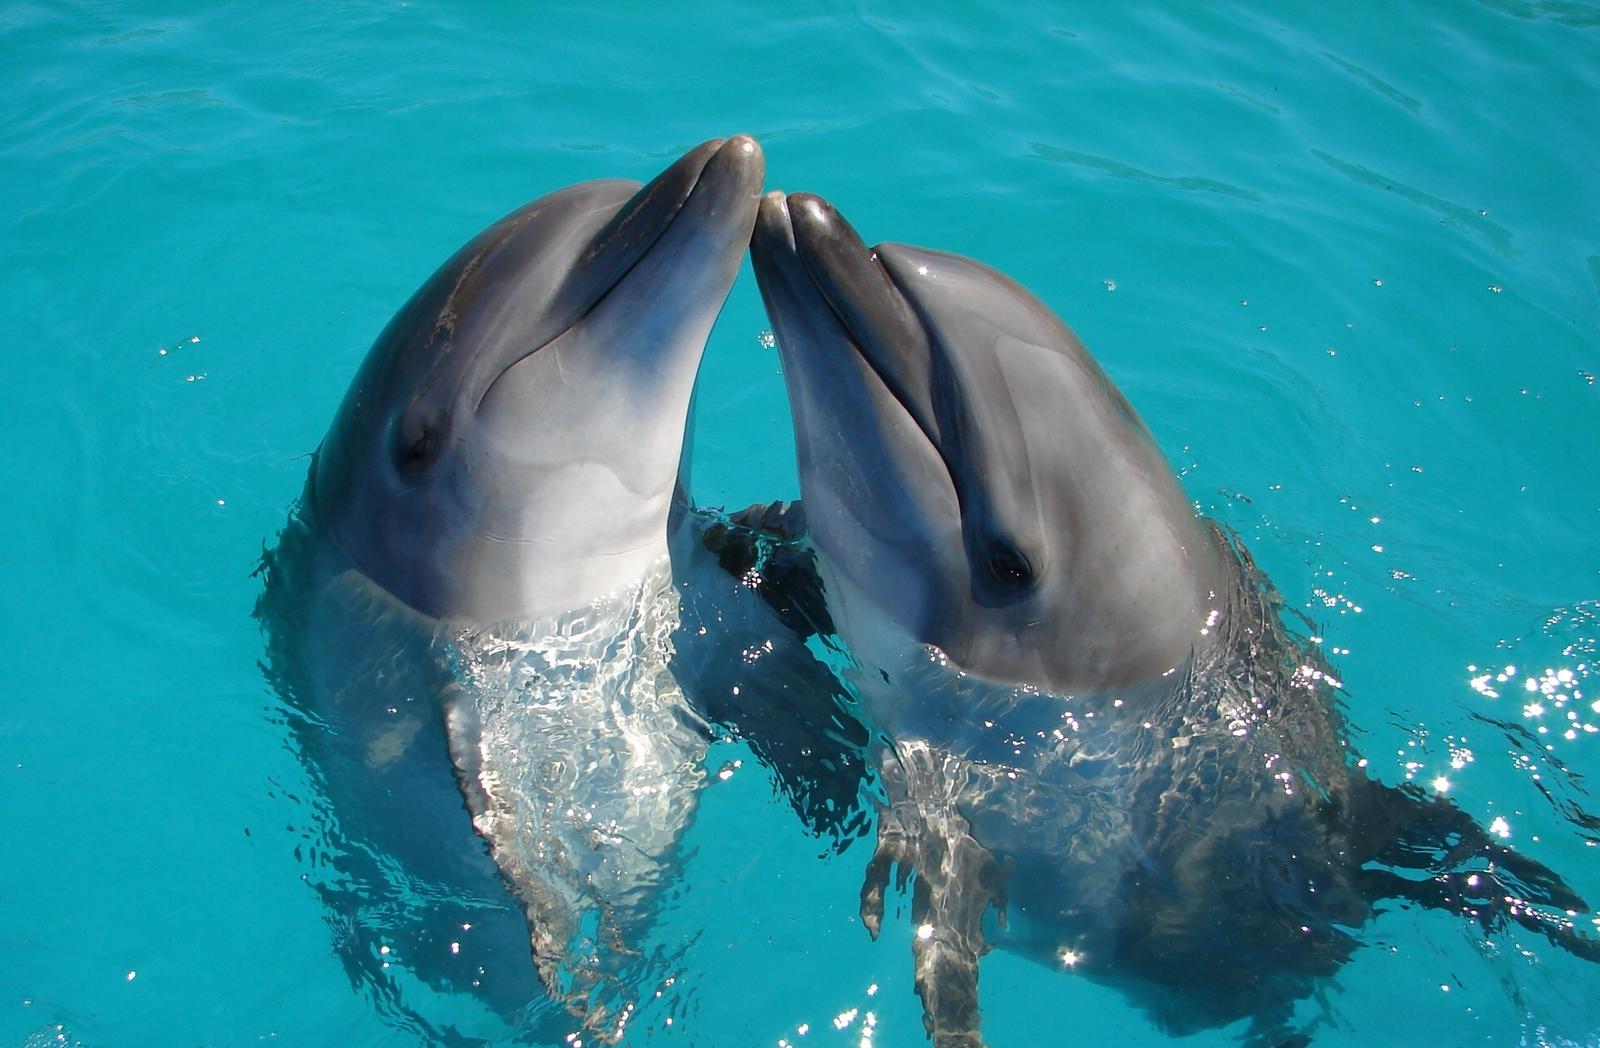 It’s Time to Find Out If You’re More Logical or Emotional With This “This or That” Game Dolphin